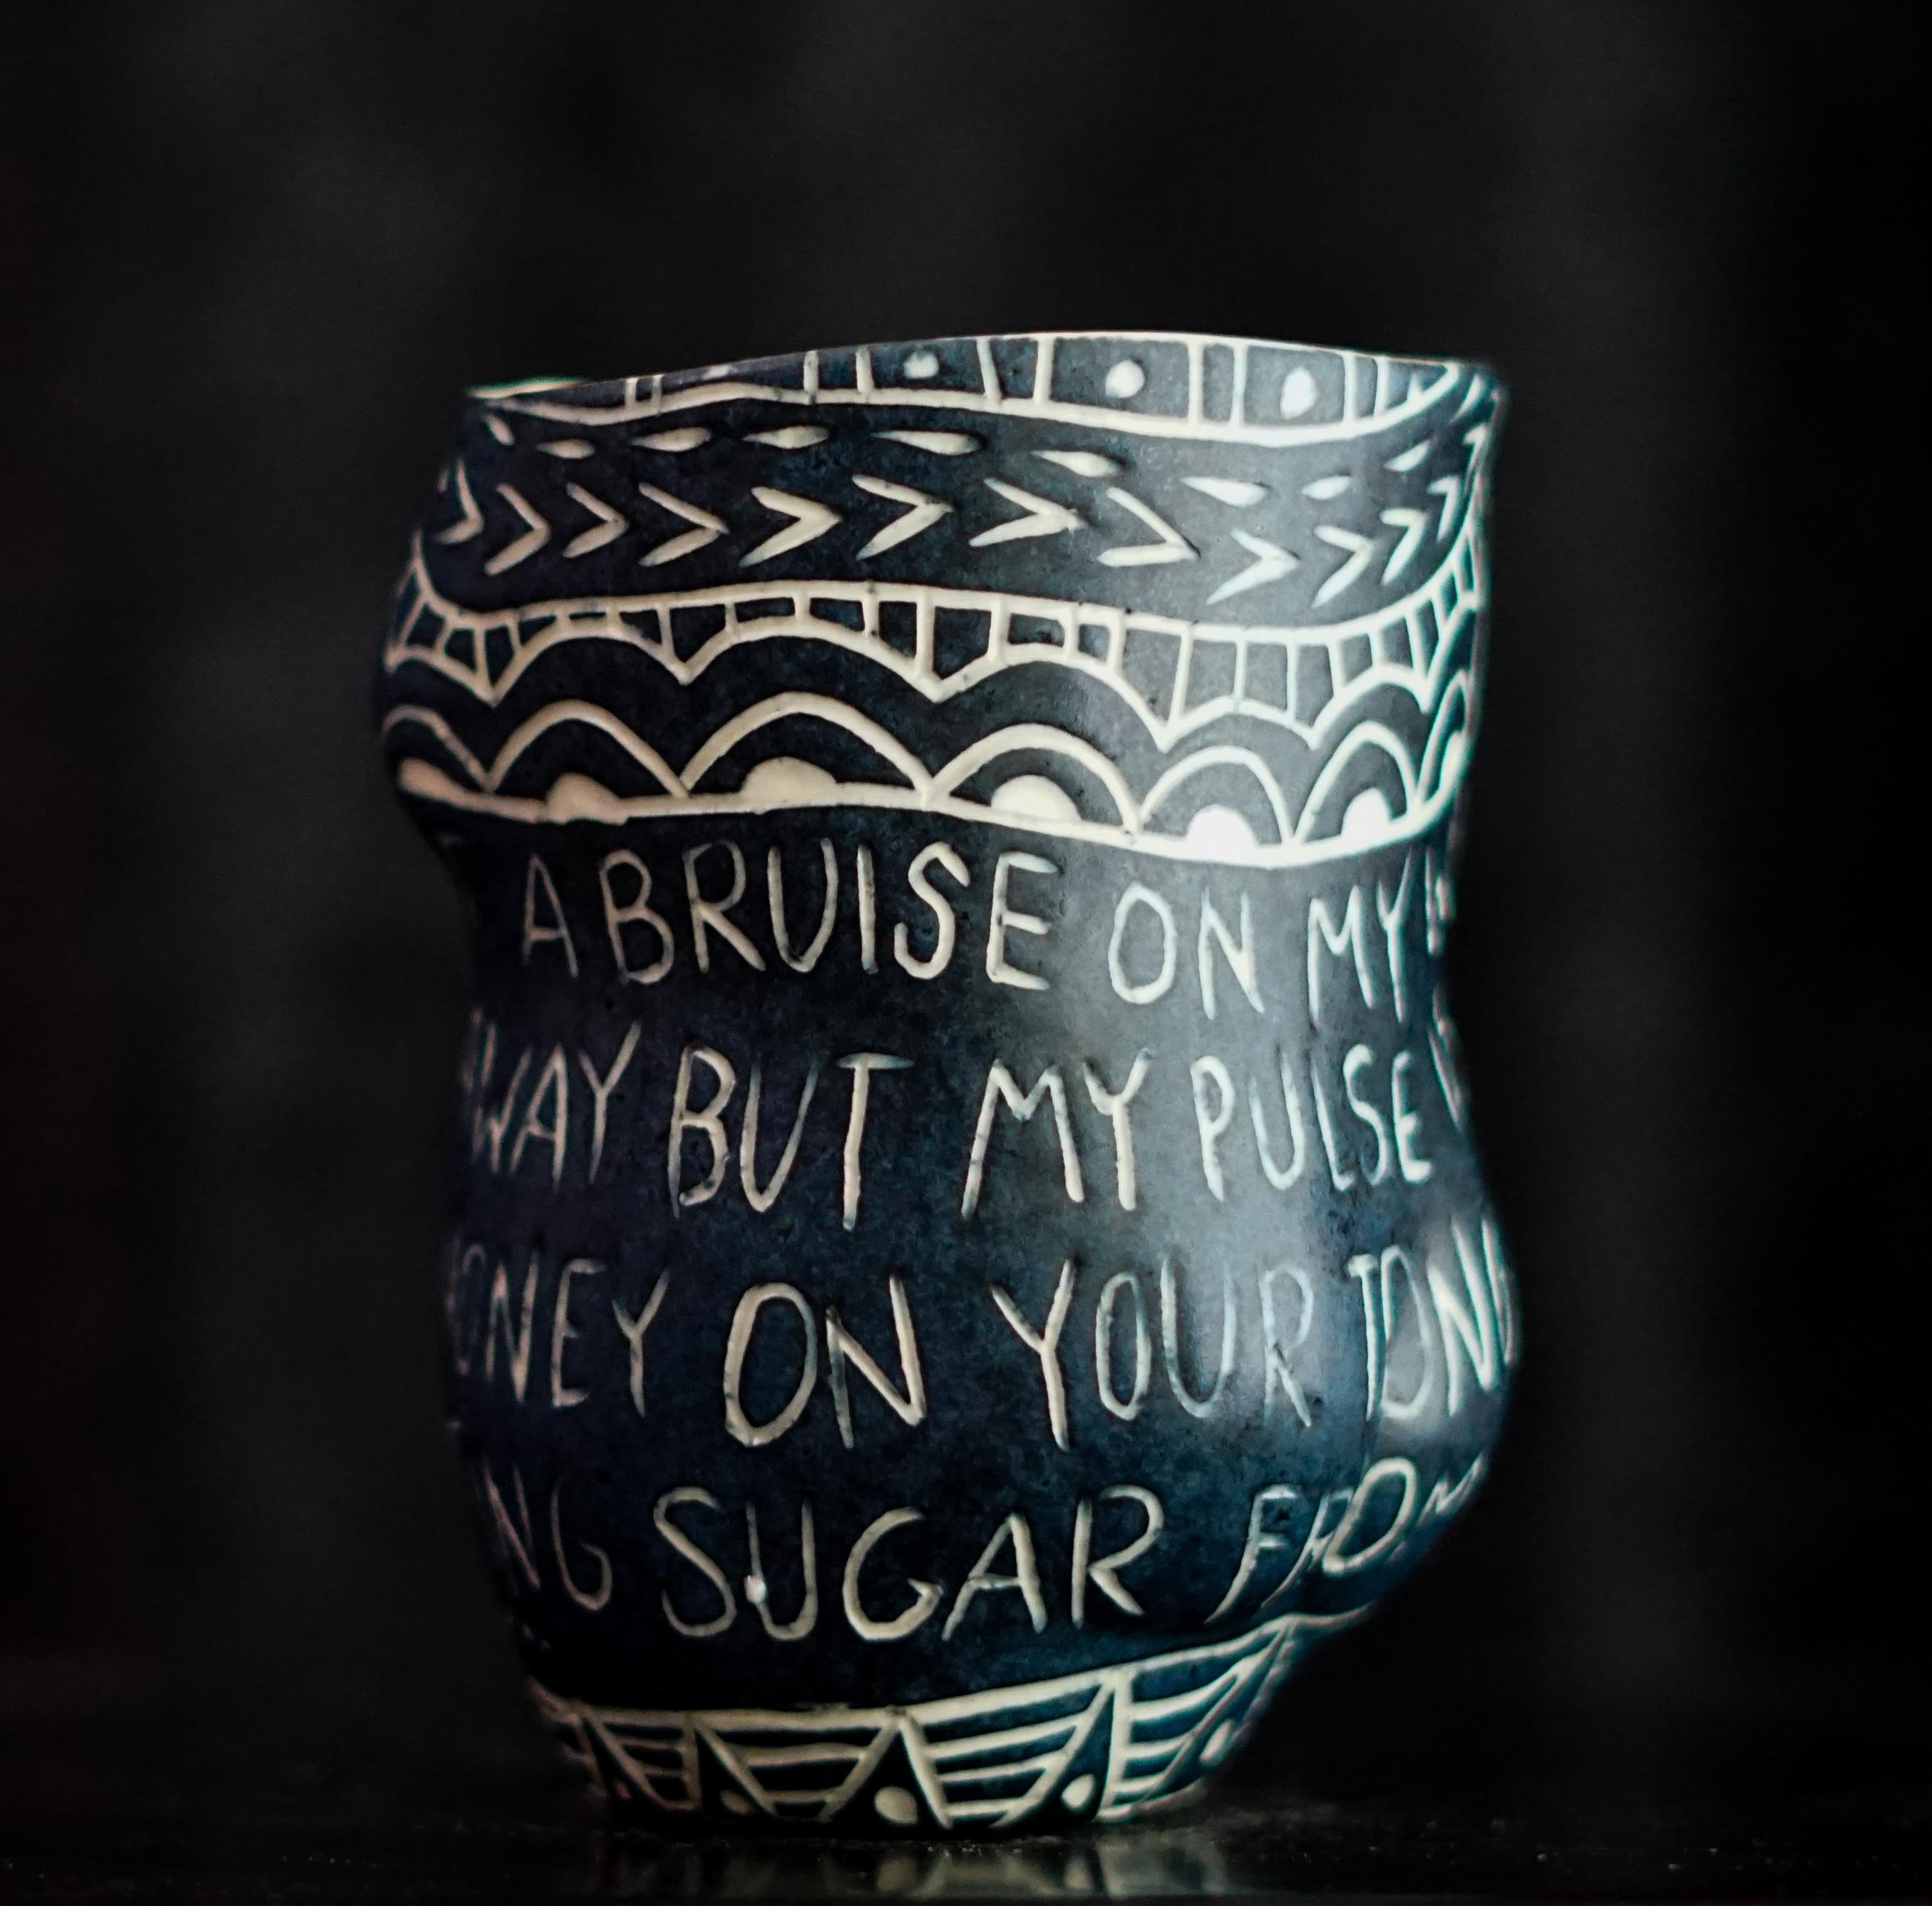 “Your Lipstick Left a Bruise...”, 2019
From the series Fragments of Our Love Story
Porcelain cup with sgraffito detailing
5 x 3 x 3 inches.

“Your lipstick left a bruise..” Your lipstick left a bruise on my wrist. I tried to wipe it away, but my